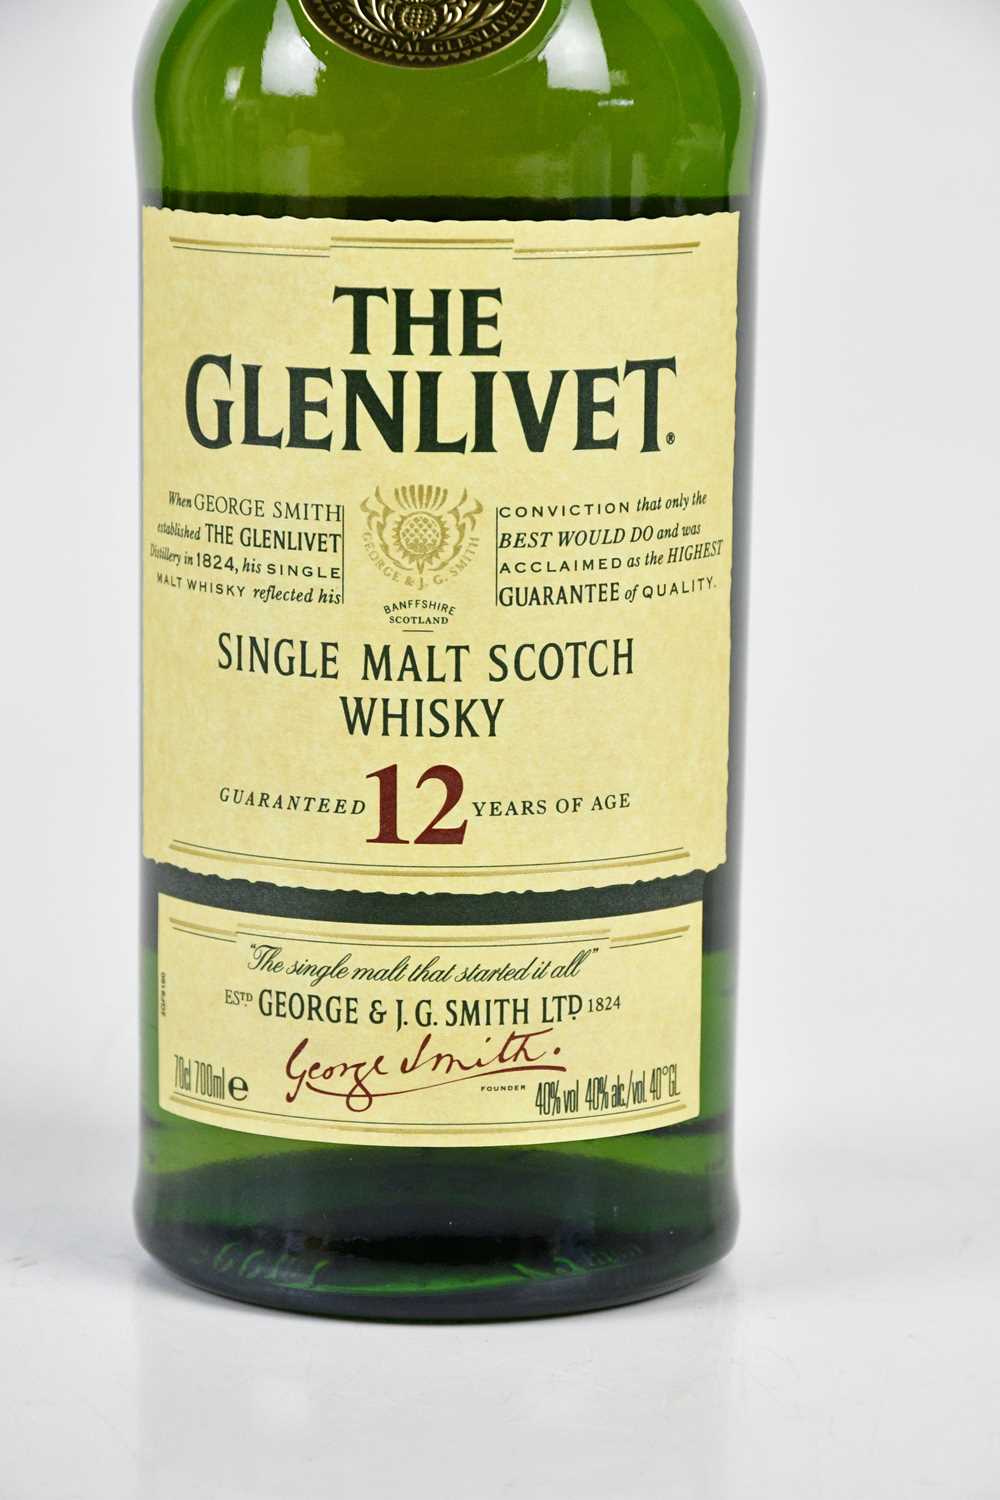 WHISKY; a bottle of The Glenlivet Single Malt aged 12 years Scotch whisky, 40%, 70cl, boxed. - Image 3 of 4